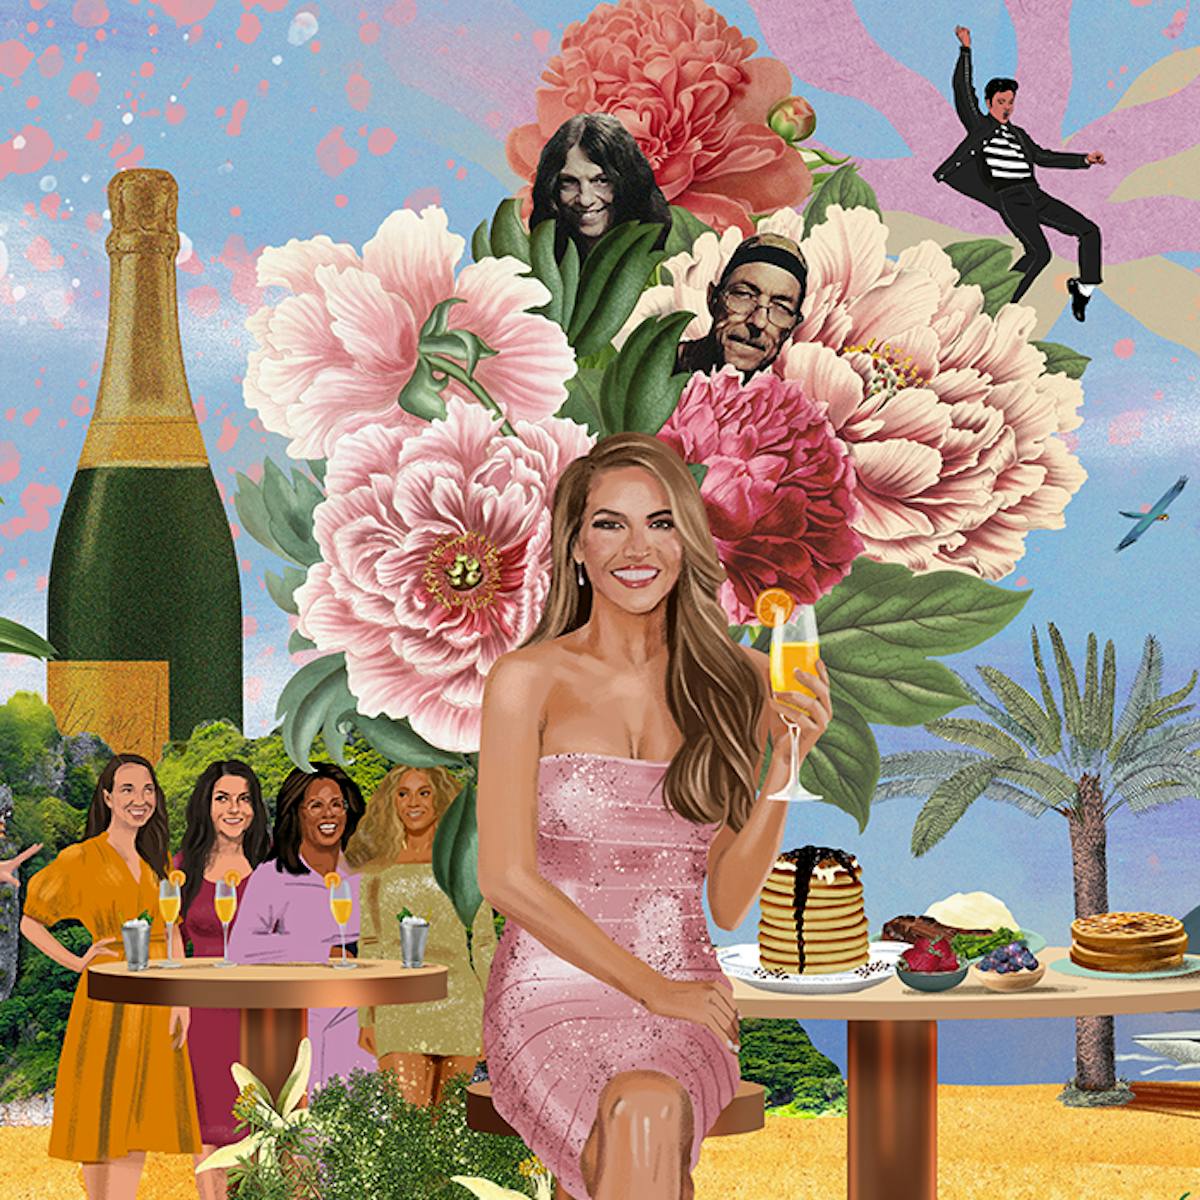 A collage of all of the people at Chrisell Stause’s last supper. The sky is streaked with pink and yellow, and there are peonies and trees on a yellow-sand beach. The group includes her parents, Elvis, the Obamas, Oprah, Pink, Beyonce, and other Selling Sunset crew members. There is a massive bottle of Veuve Cliquot in the middle of the group